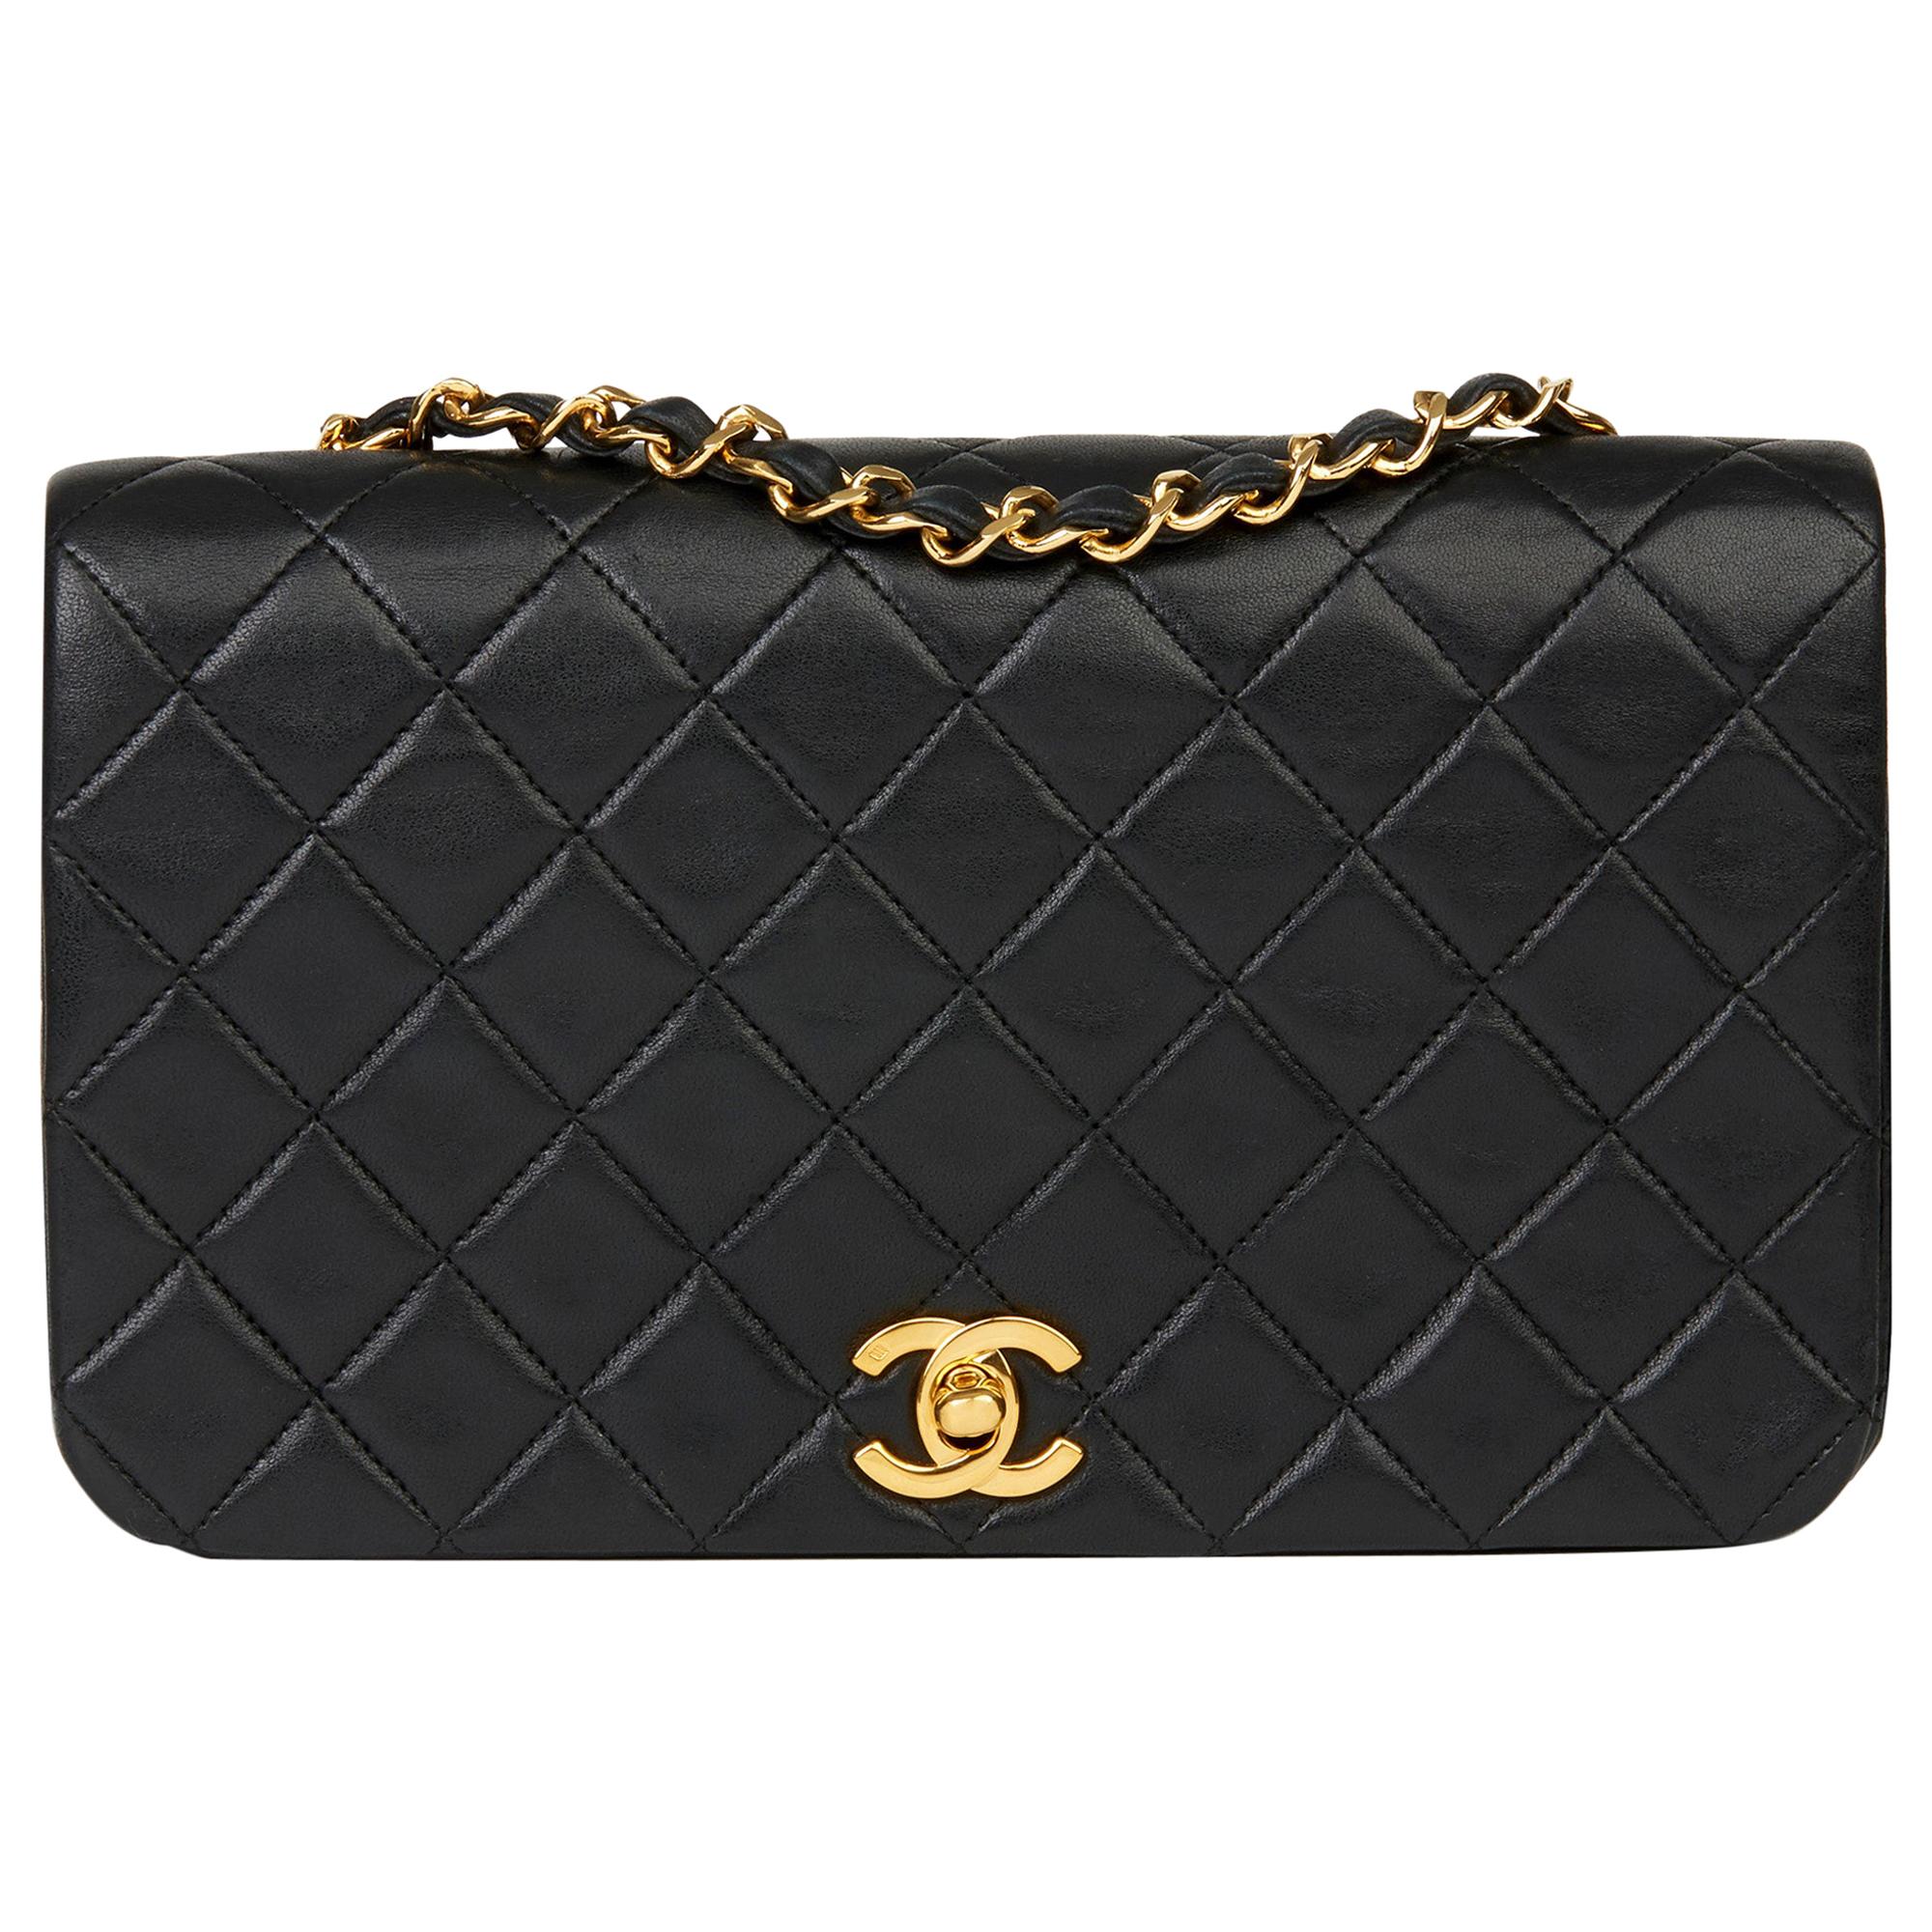 1990 Chanel Black Quilted Lambskin Vintage Small Classic Single